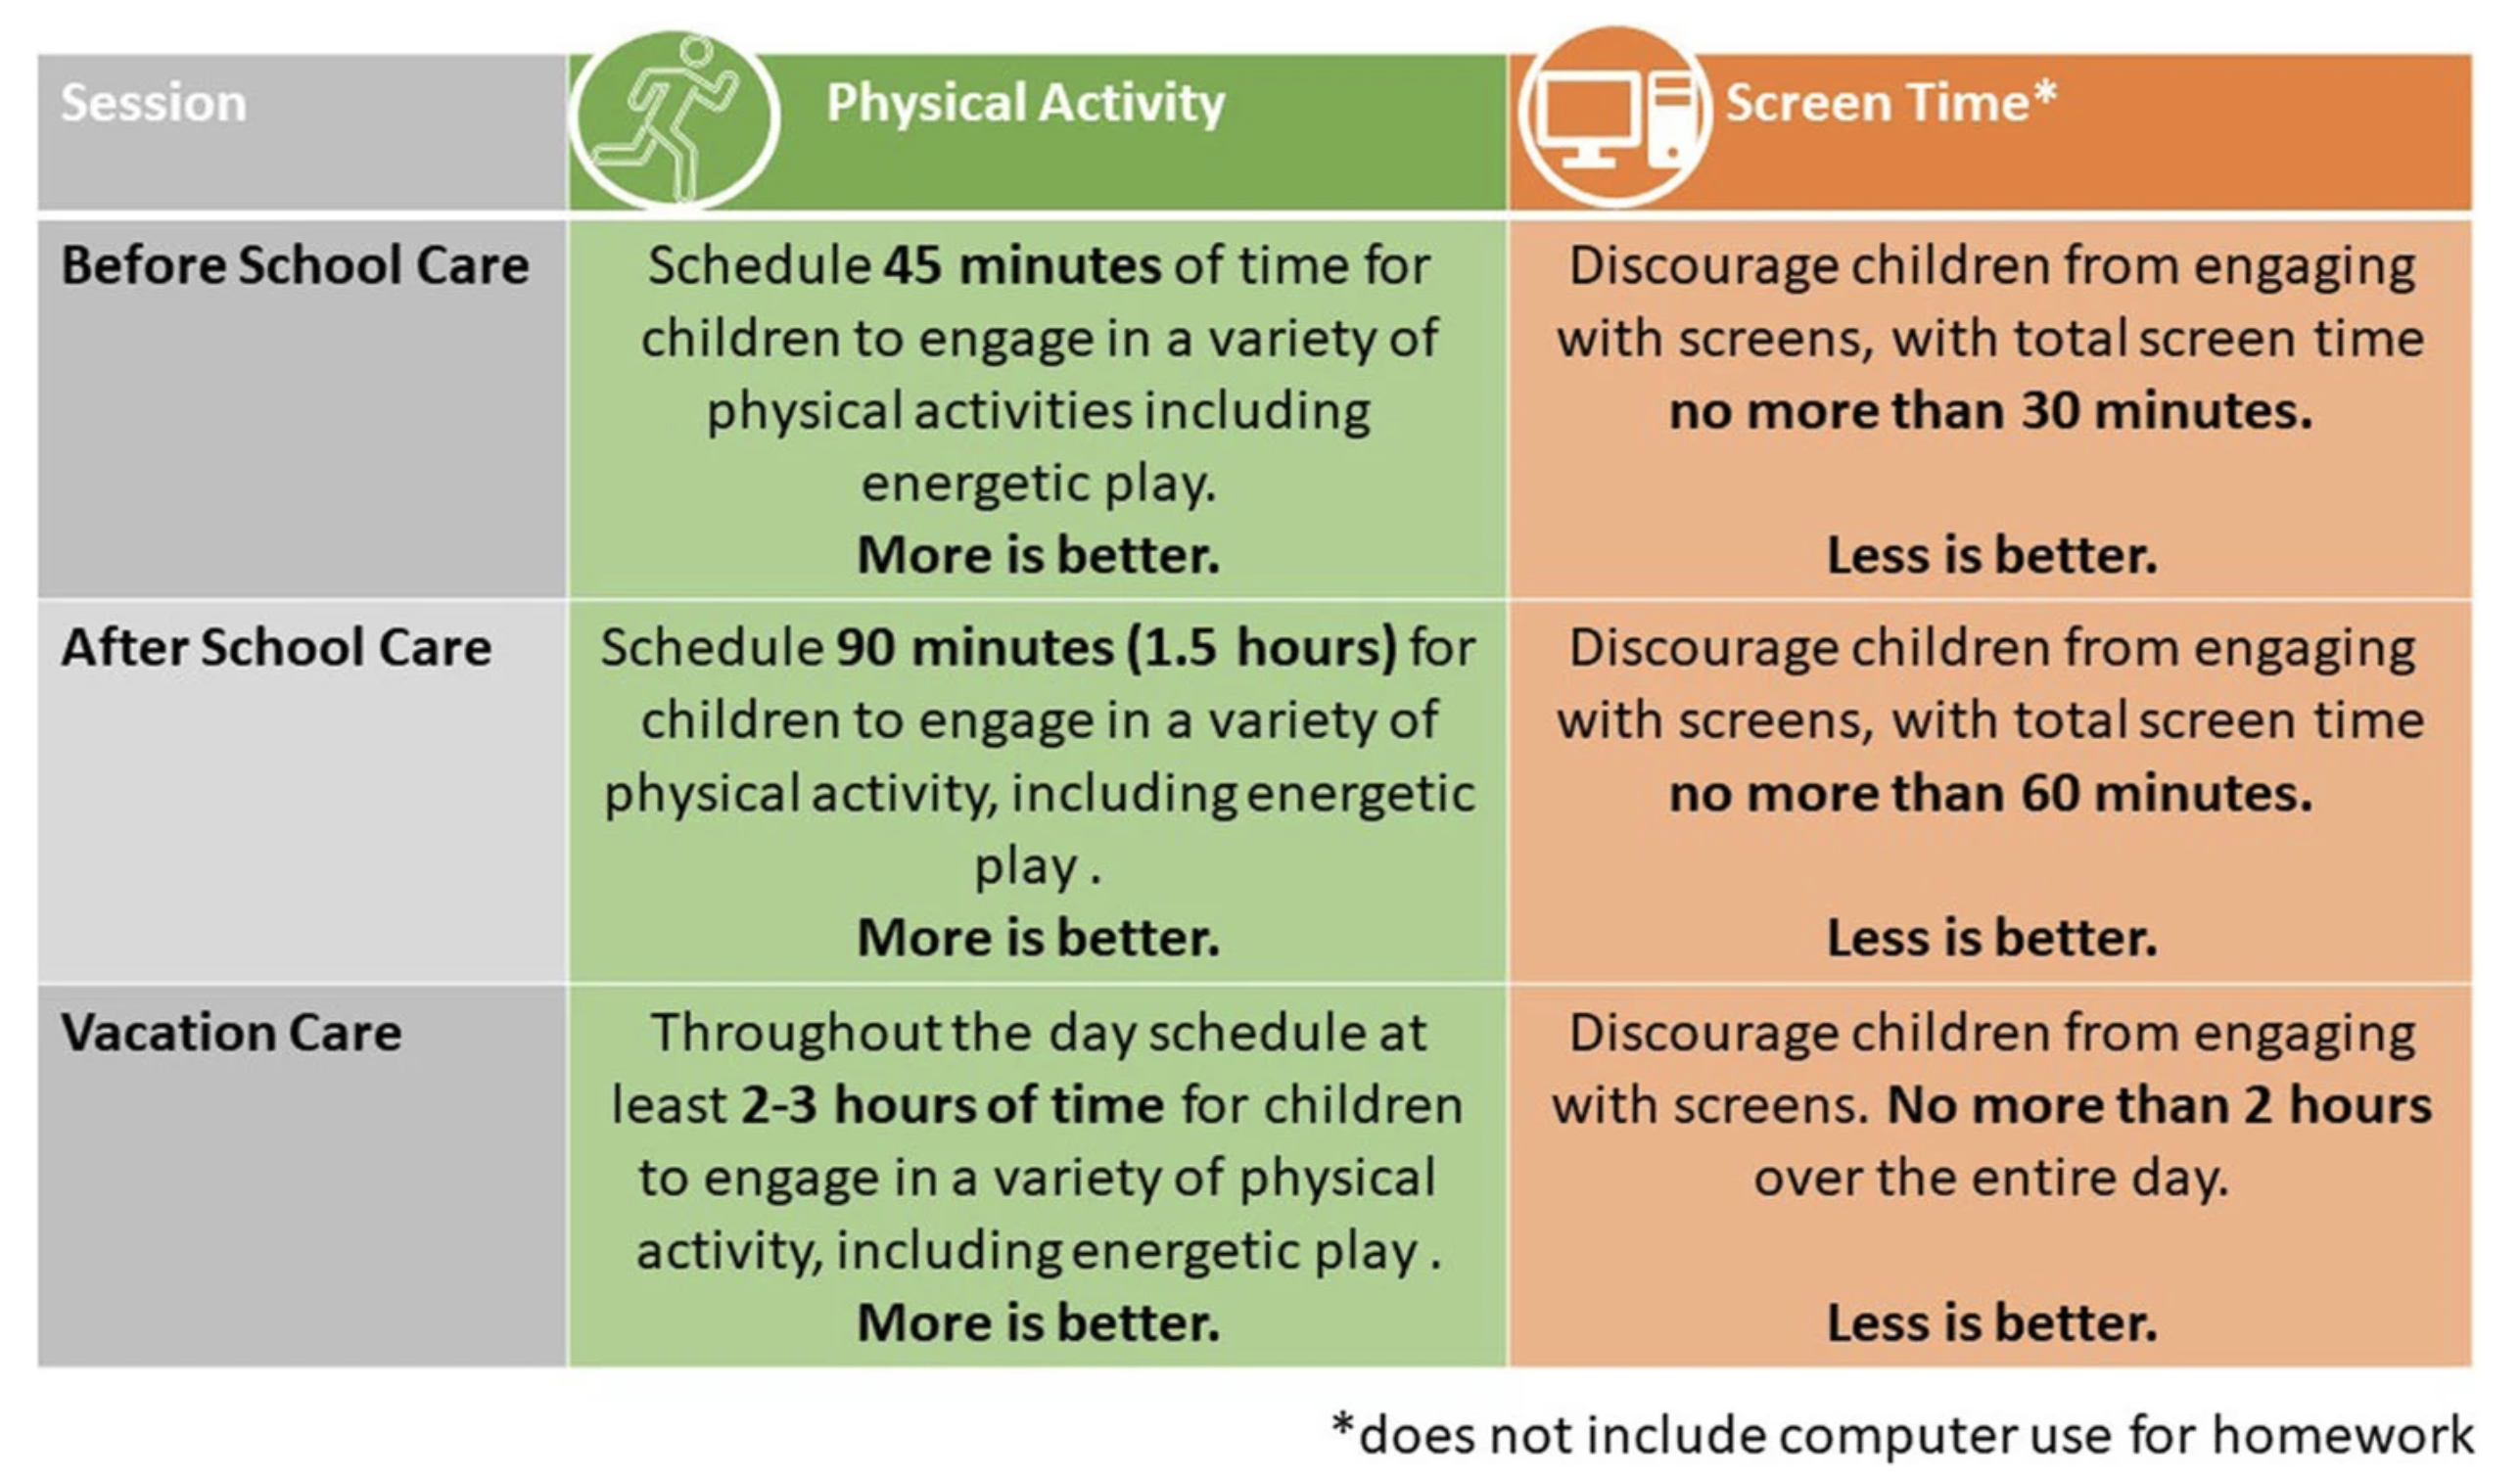 Physical Activity and Screen Time Guidelines for OSHC